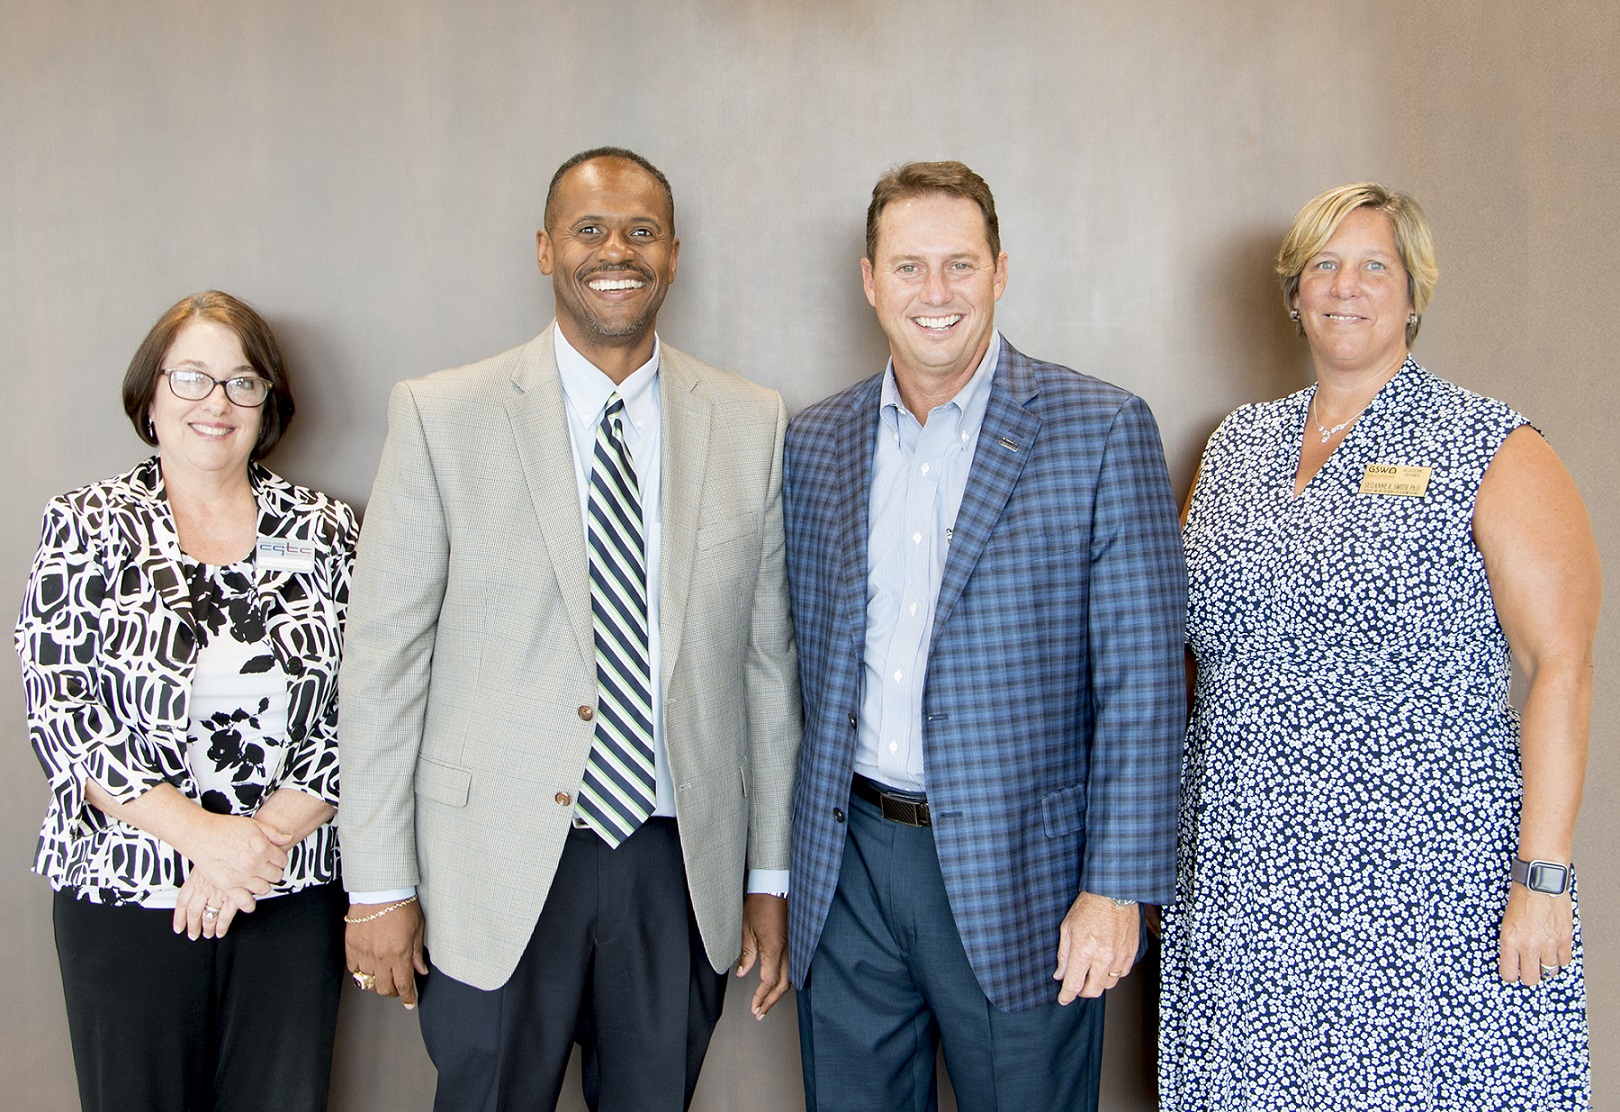 (From left to right) Dr. Amy Holloway, vice president of Academic Affairs at CGTC and Dr. Ivan H. Allen, president of CGTC, join GSW president, Dr. Neal Weaver, and Dr. Suzanne R. Smith, provost and vice president for Academic Affairs, following the signing of the two agreements. 